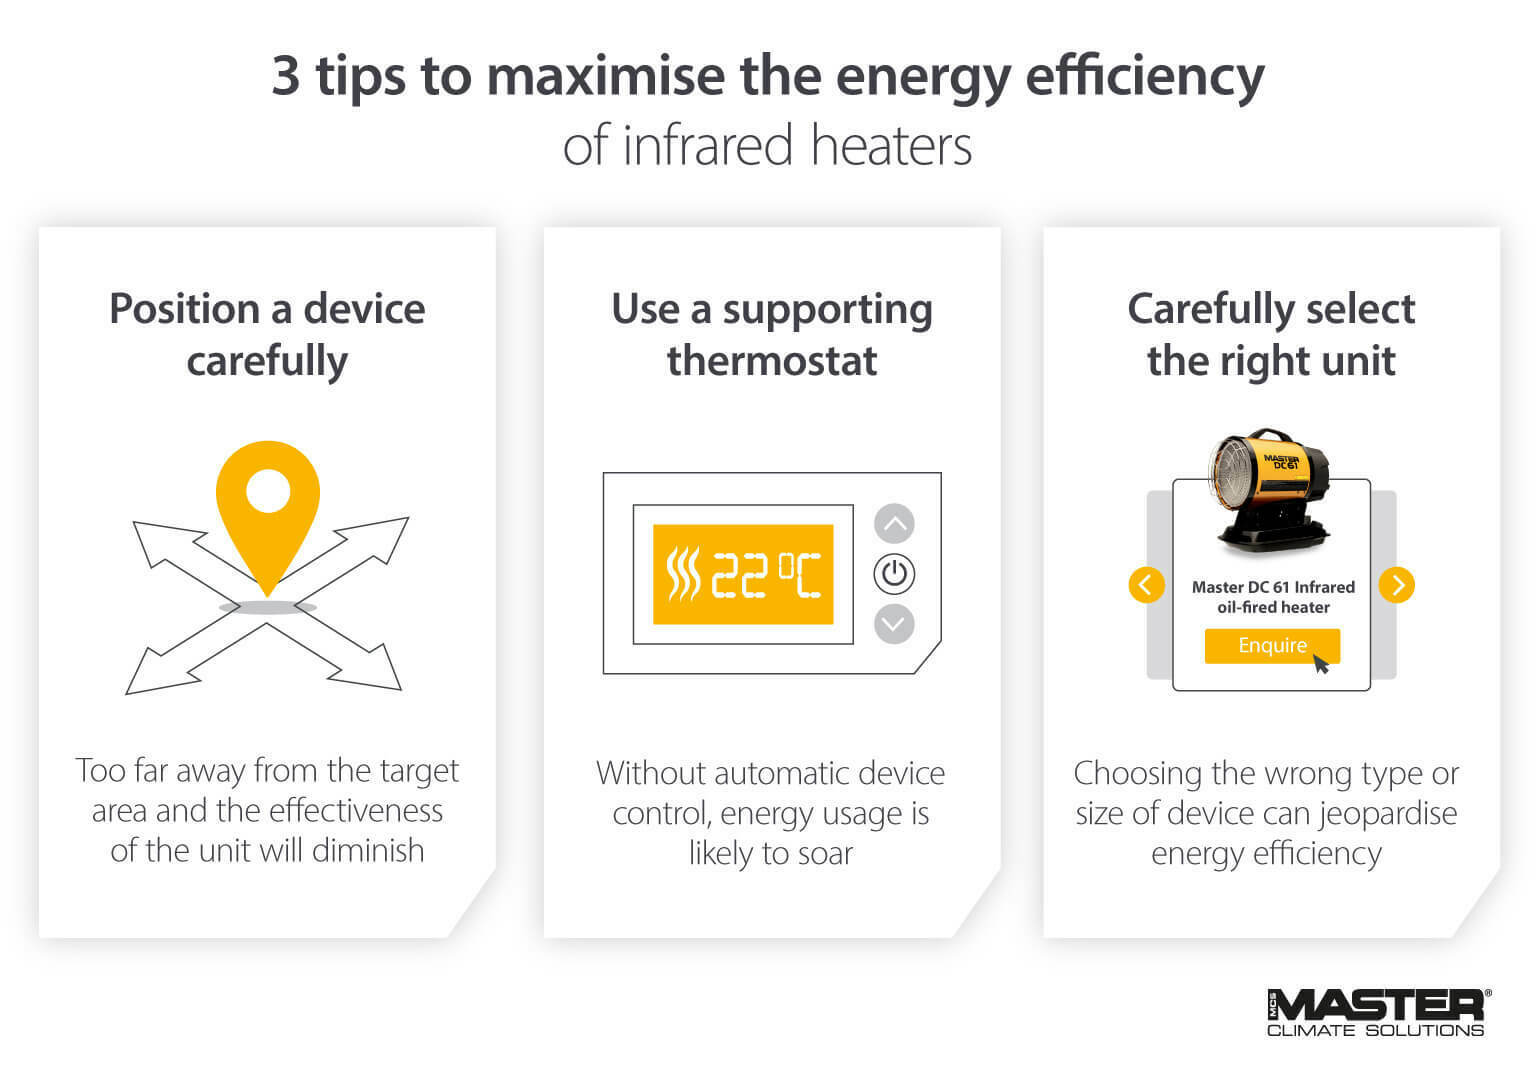 3 tips to maximise energy efficiency of infrared heaters - Infographic image